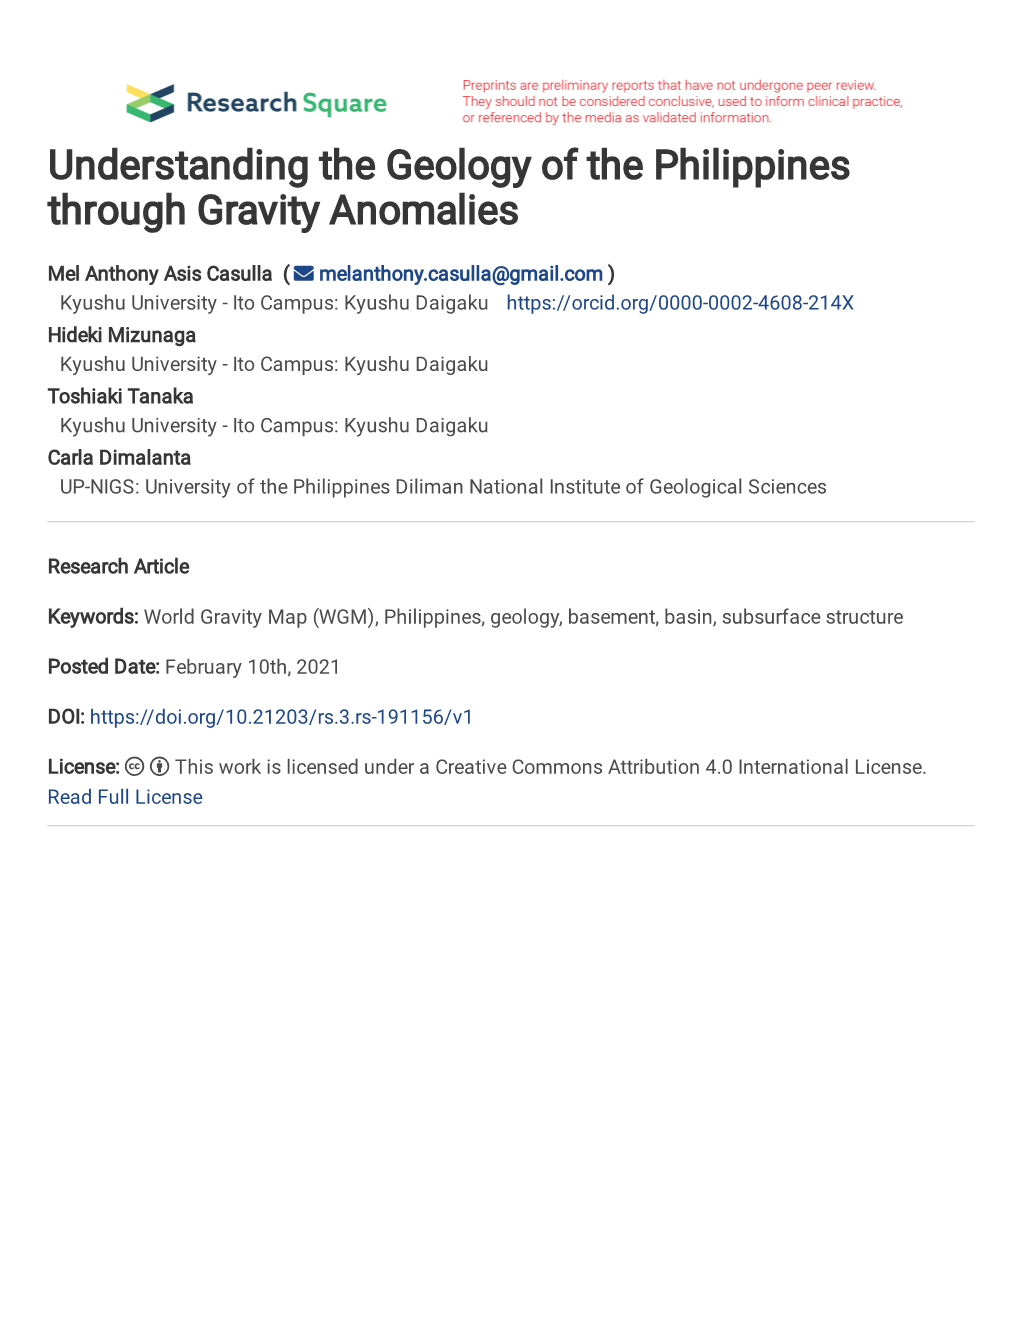 Understanding the Geology of the Philippines Through Gravity Anomalies